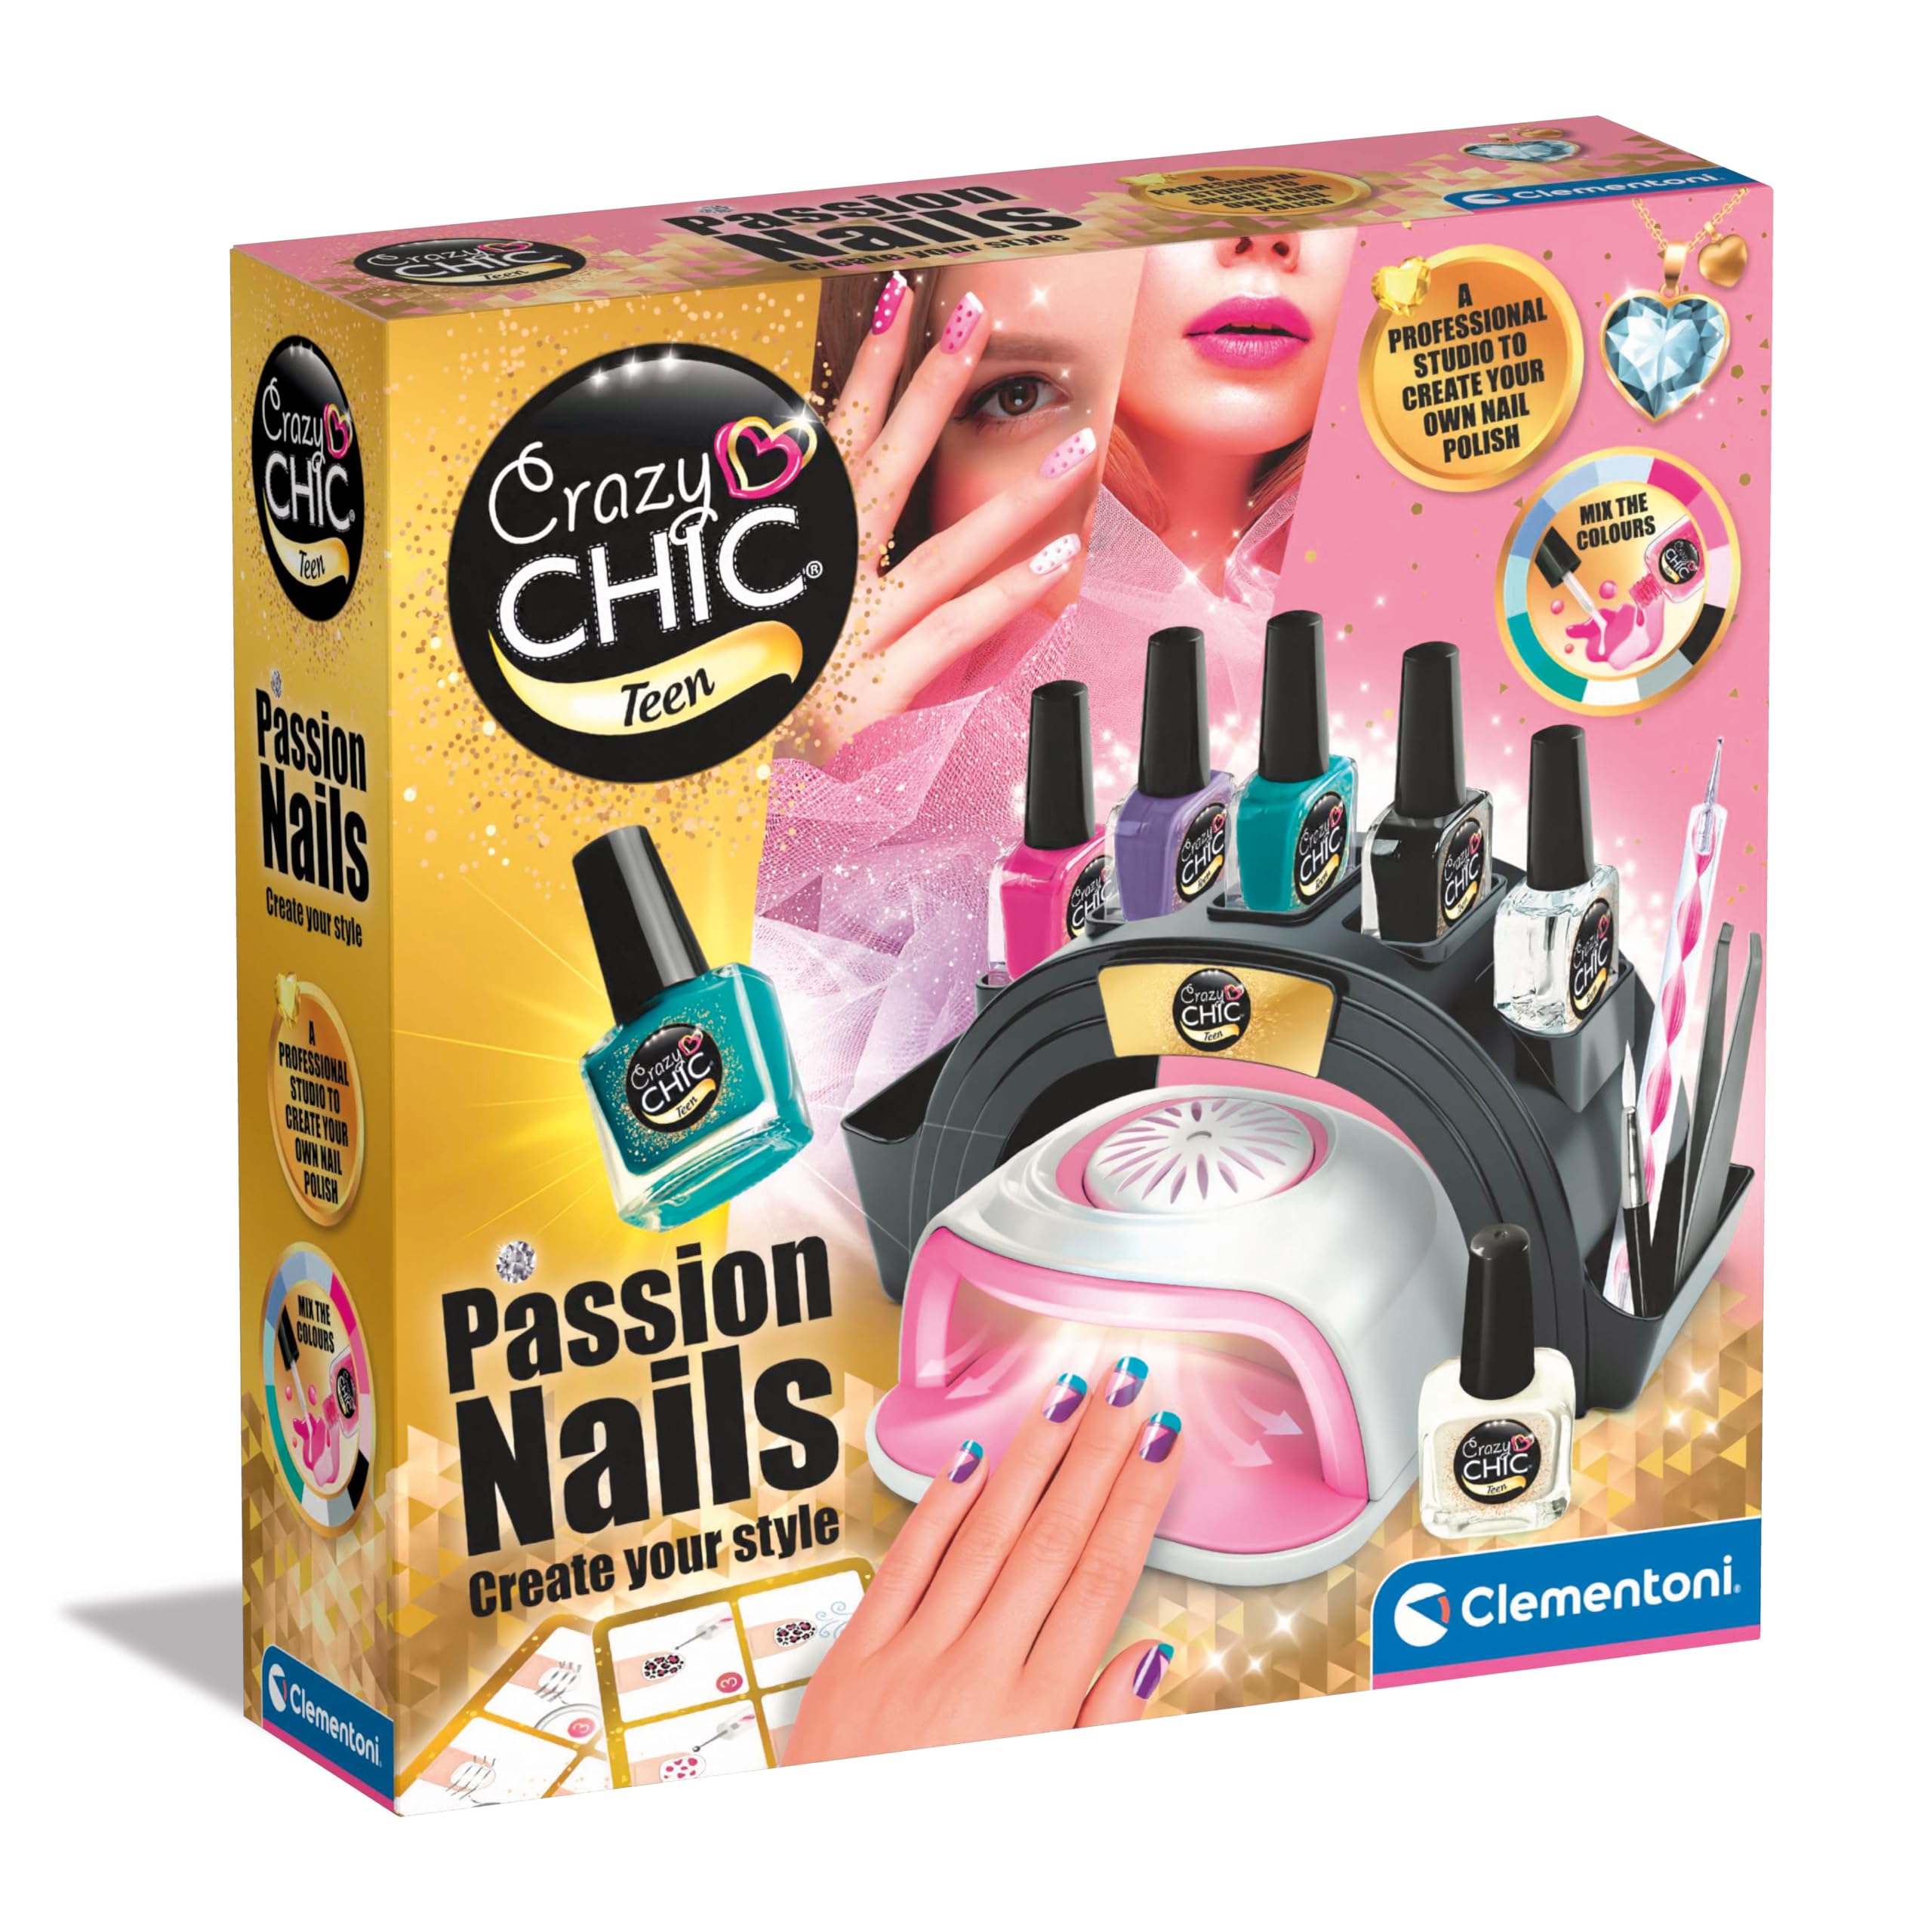 CRAZY CHIC TEEN - PASSION NAILS